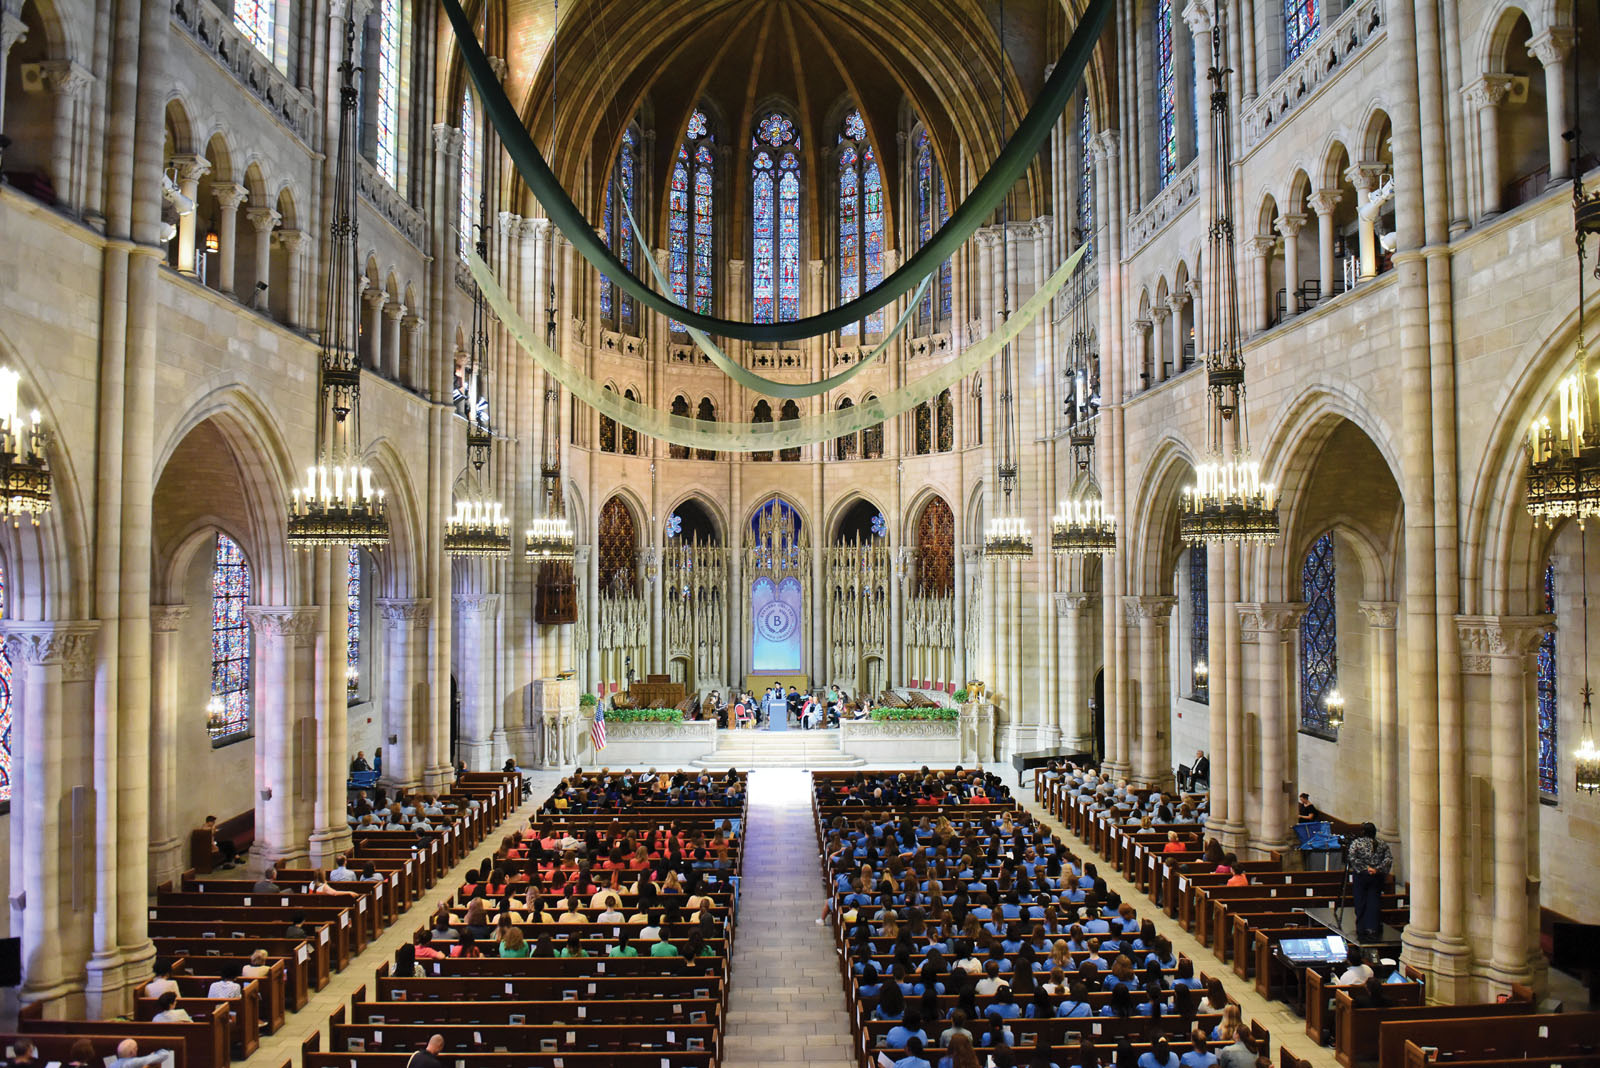 Interior church with students and faculty and staff members